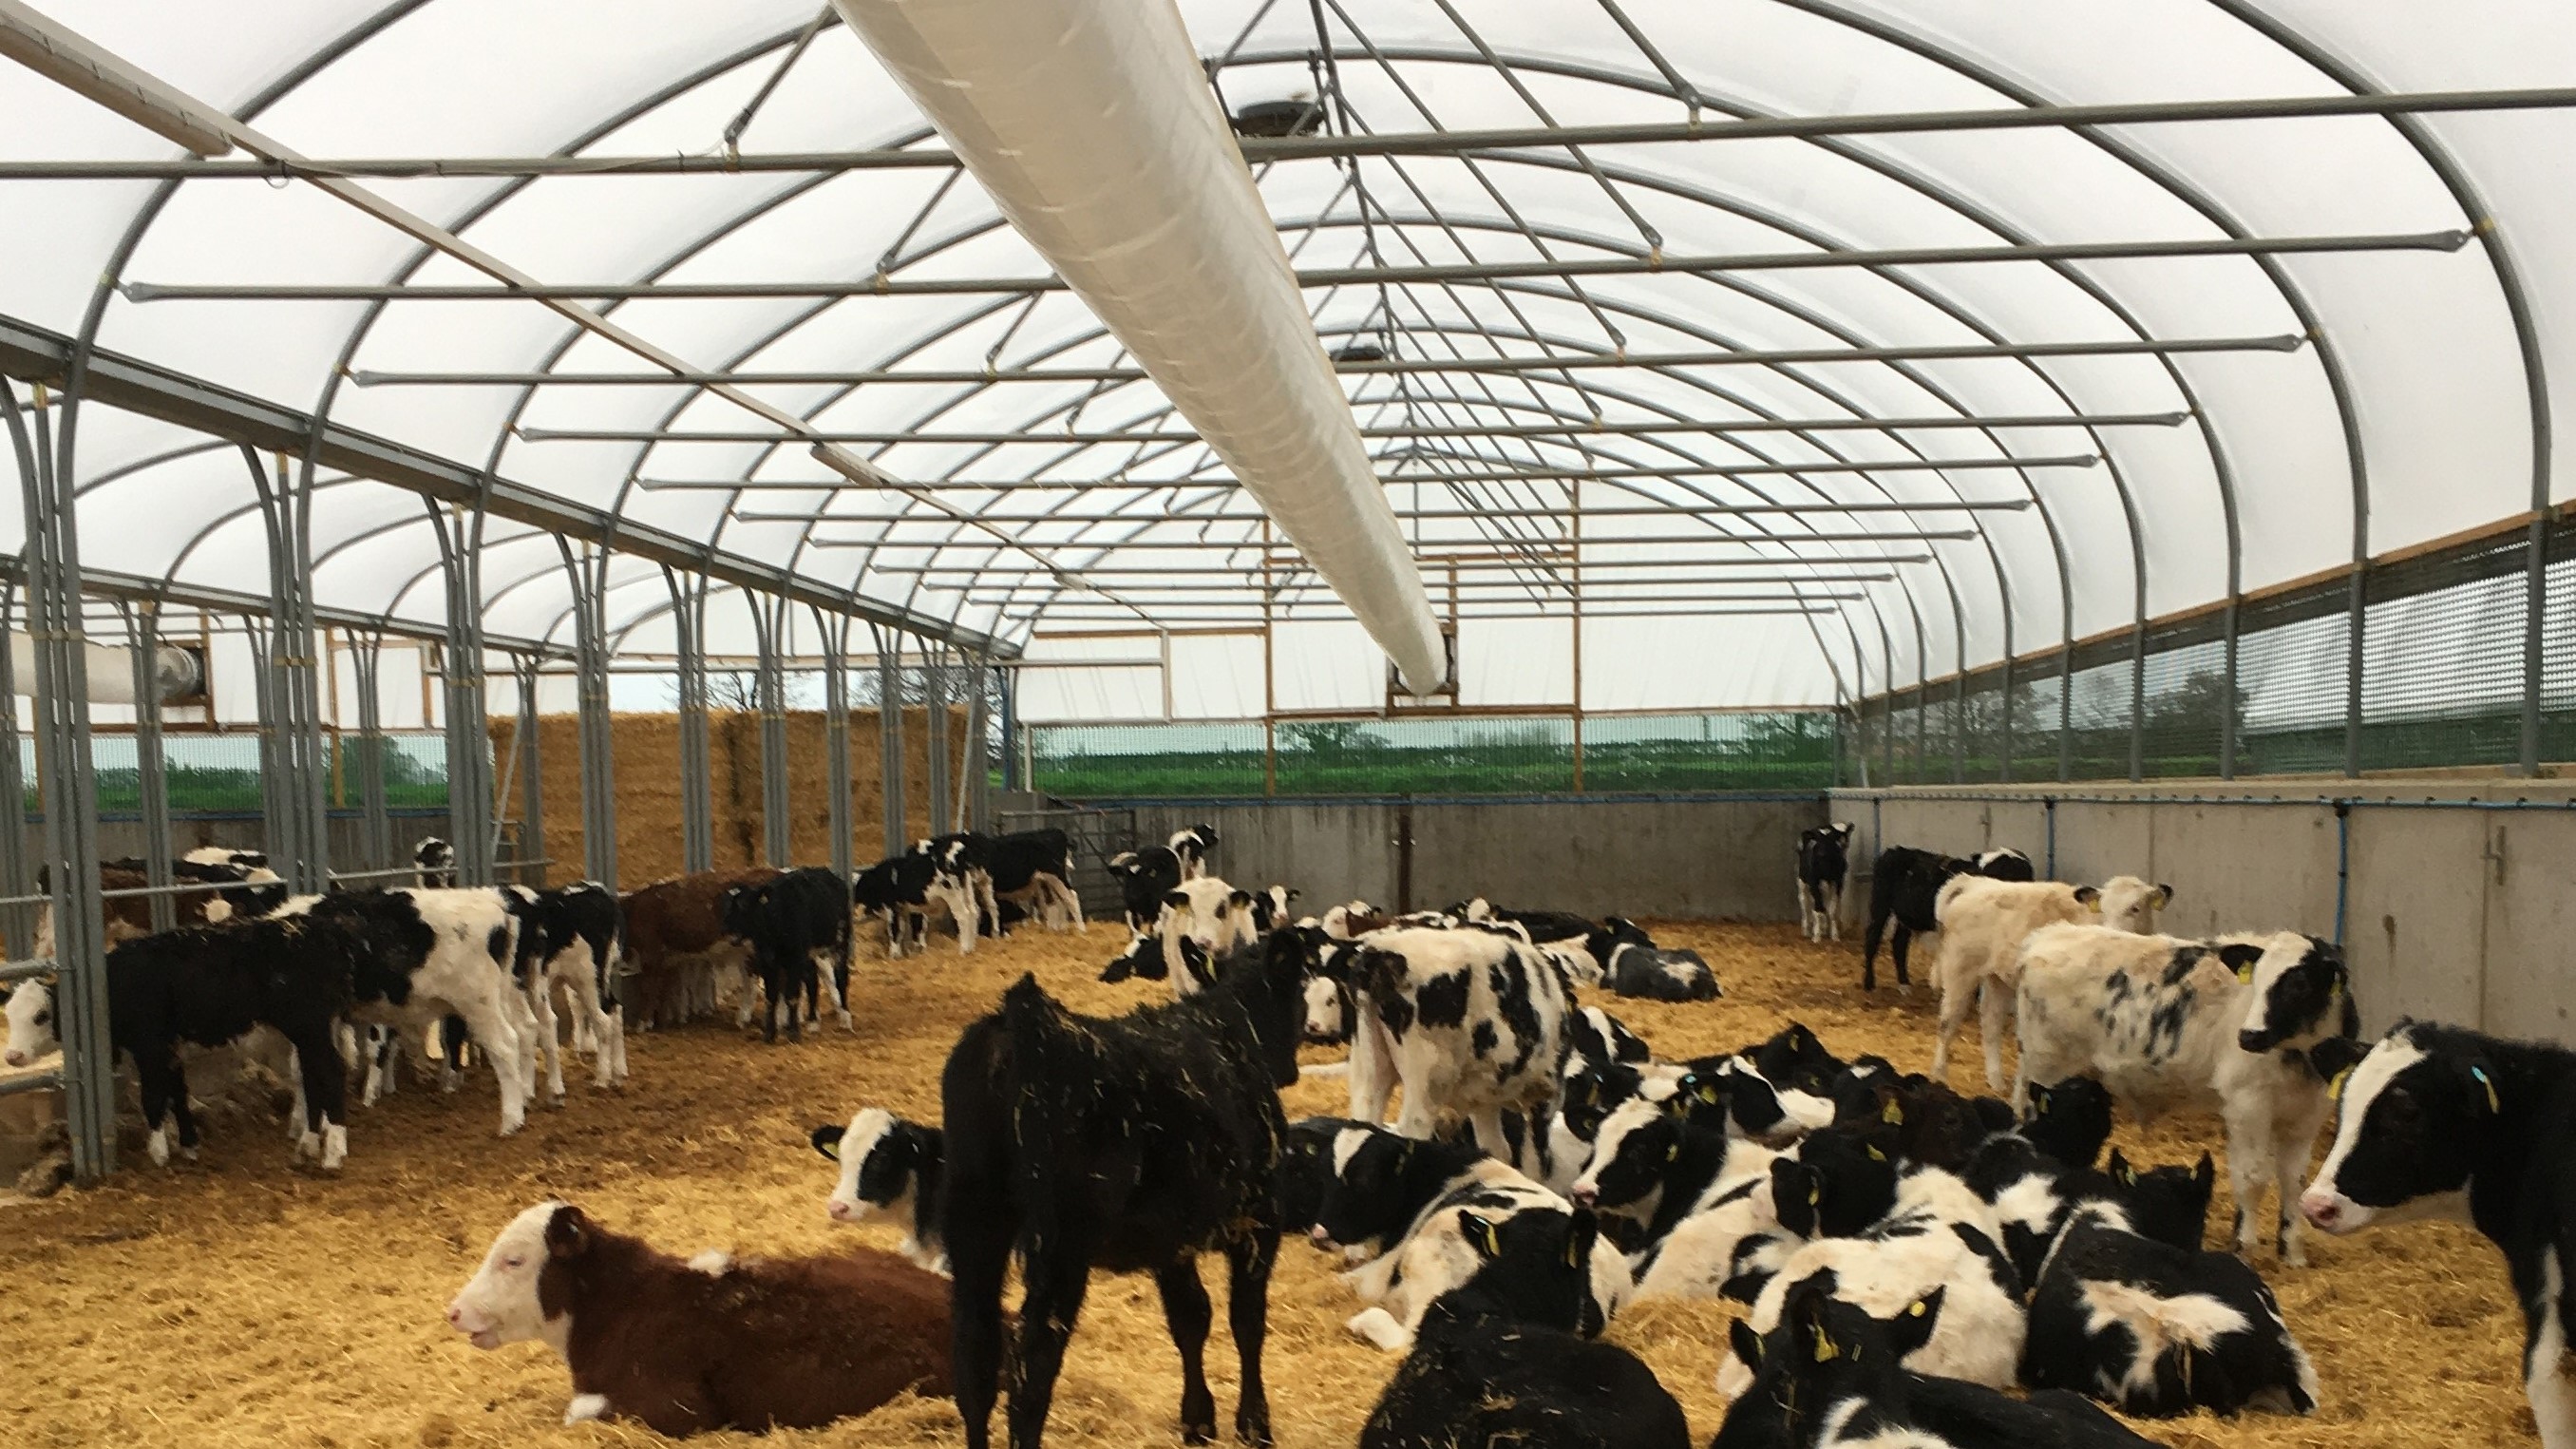 Many calves inside a straw-bedded polytunnel with positive pressure ventilation tube at the top.